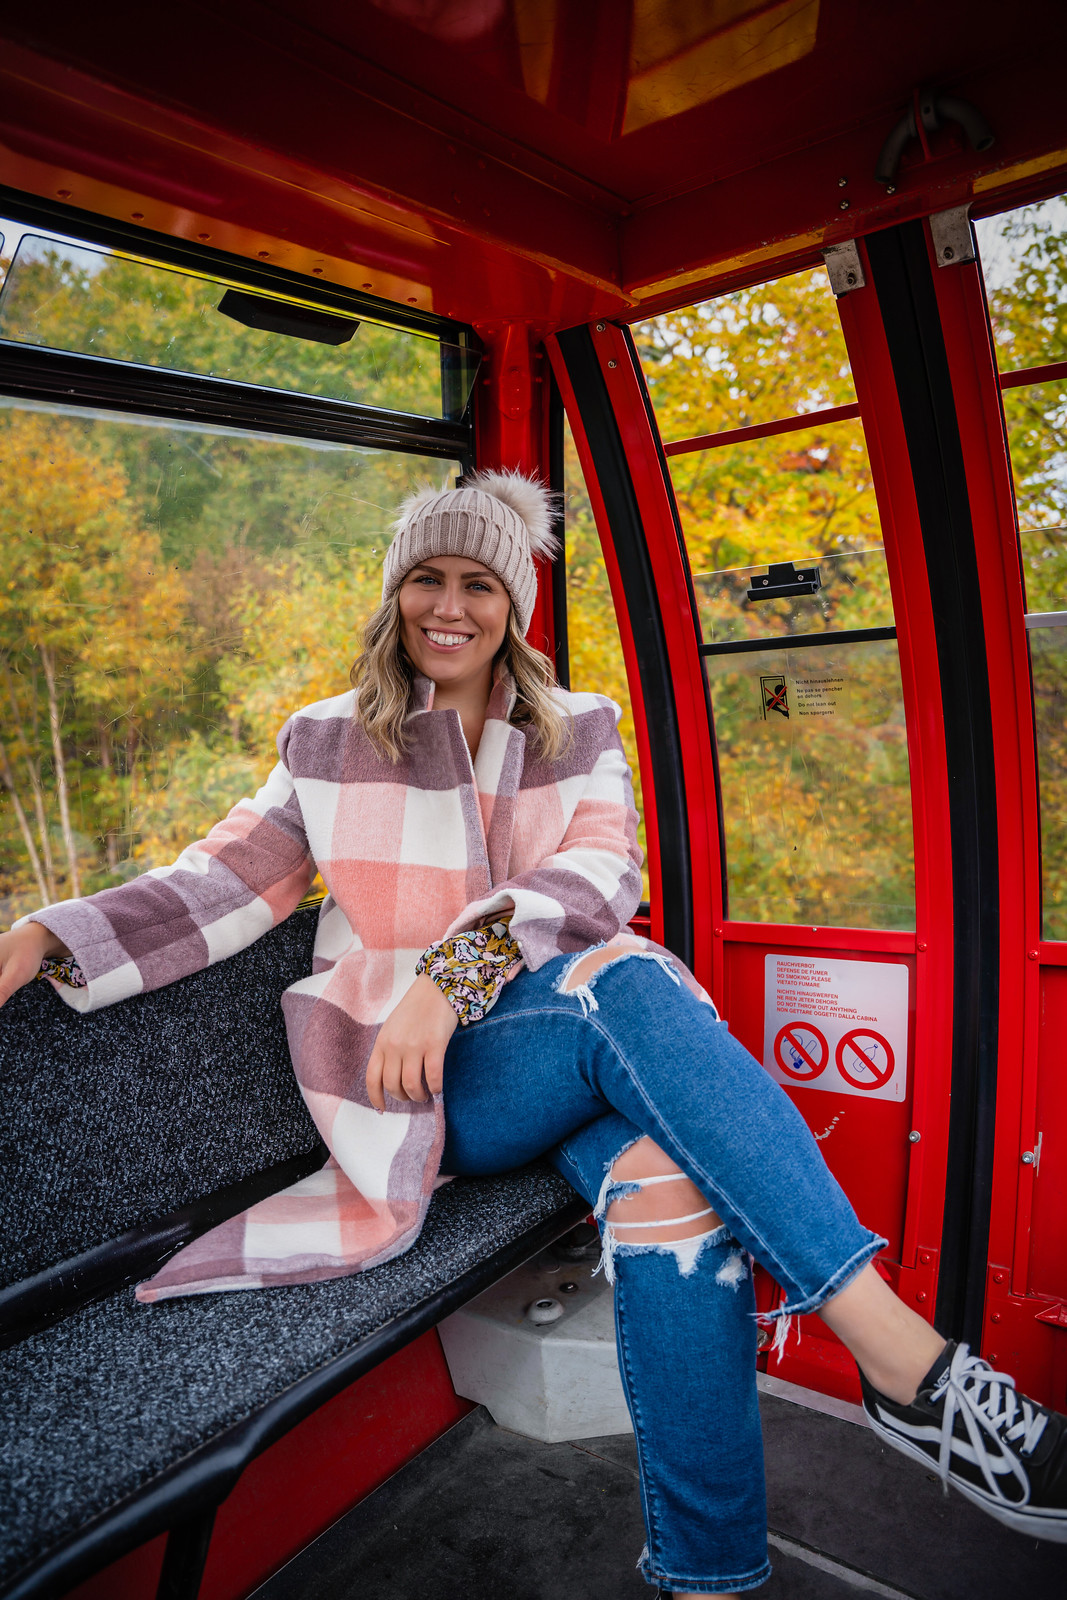 Gondola Skyride at Stowe Mountain Resort Mount Mansfield | Stowe VT | My Complete Vermont Fall Travel Guide: What to See, Do & Eat | Ultimate Fall Guide to Vermont | 5 Day Vermont Road Trip | Fall Foliage Road Trip Guide